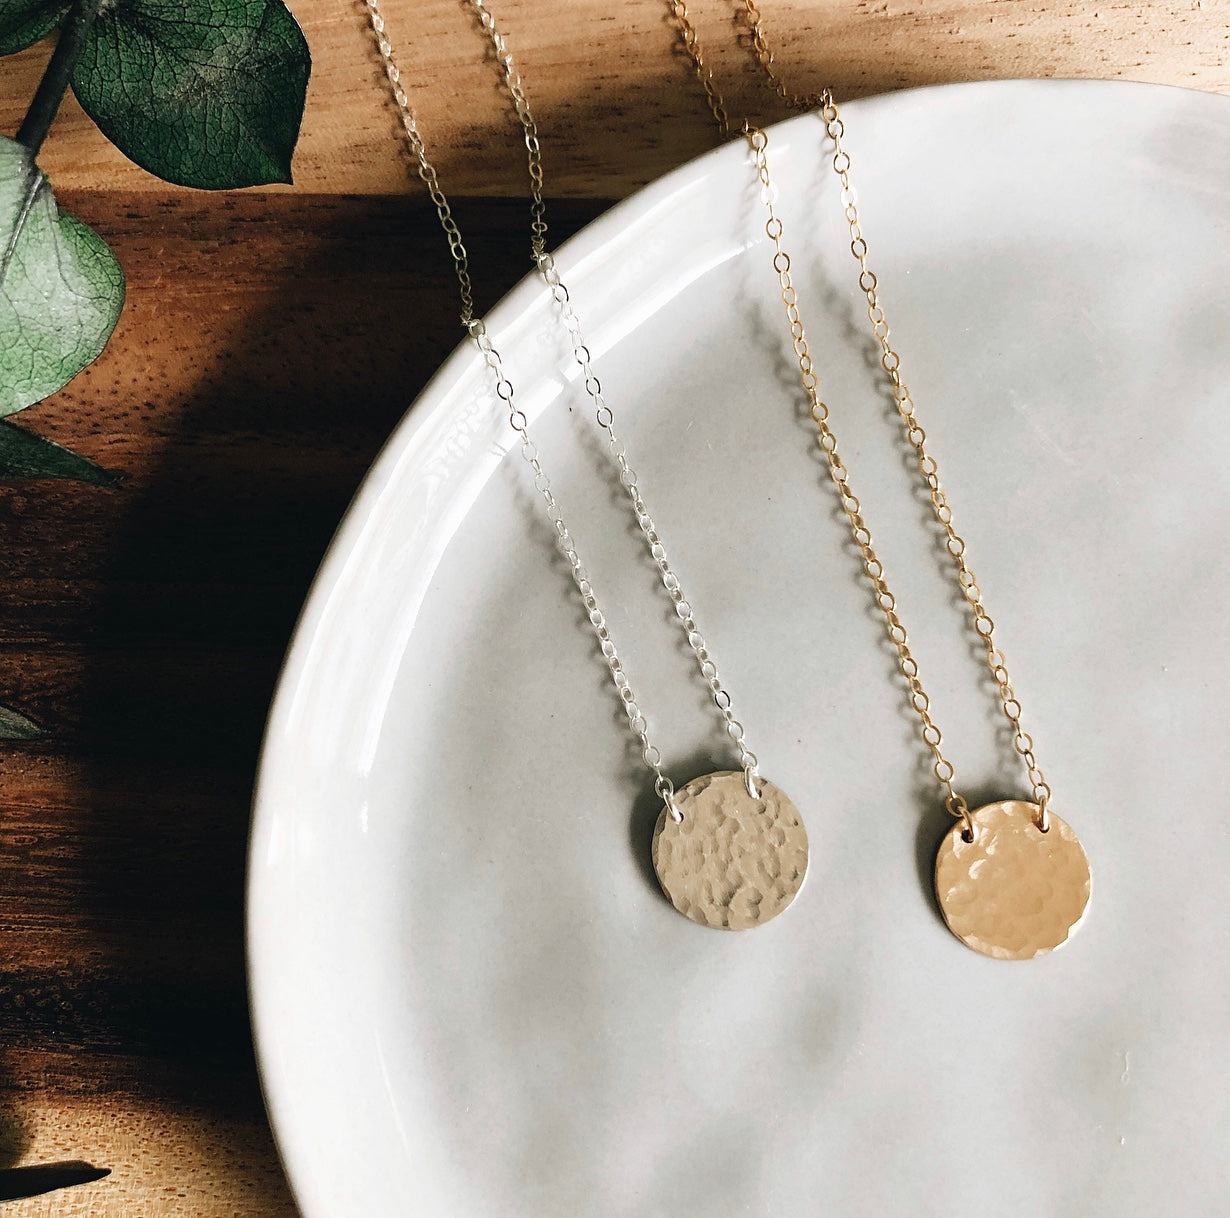 Hammered Disc Necklace - Gold Filled - Personalized Necklace - Hand Stamped  - Initial Disc - Mother's Necklace - Dainty Necklace - Christmas